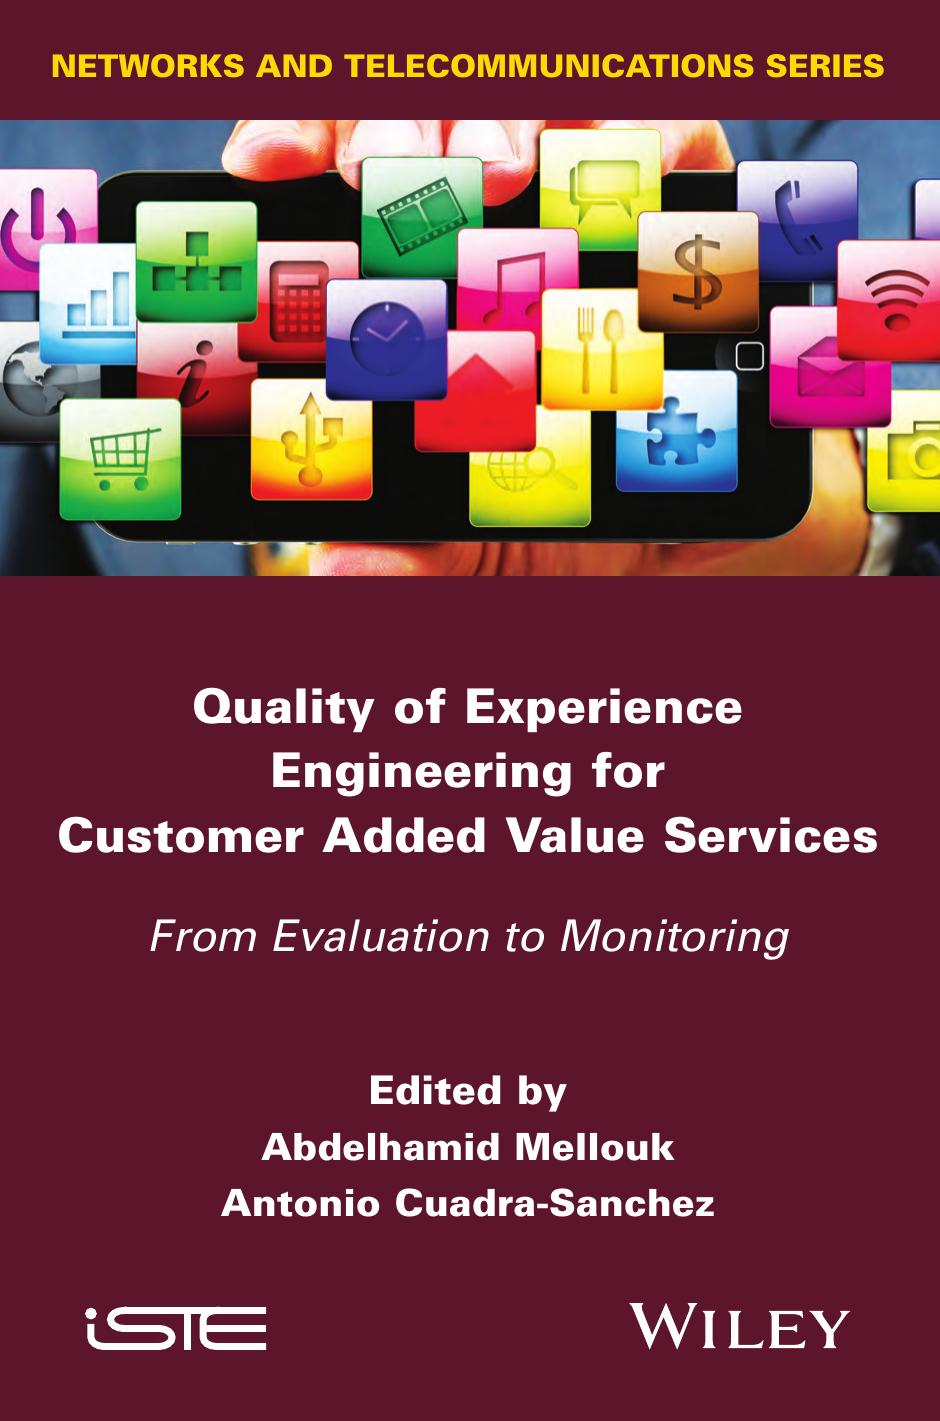 Quality of Experience Engineering for Customer Added Value Services: From Evaluation to Monitoring